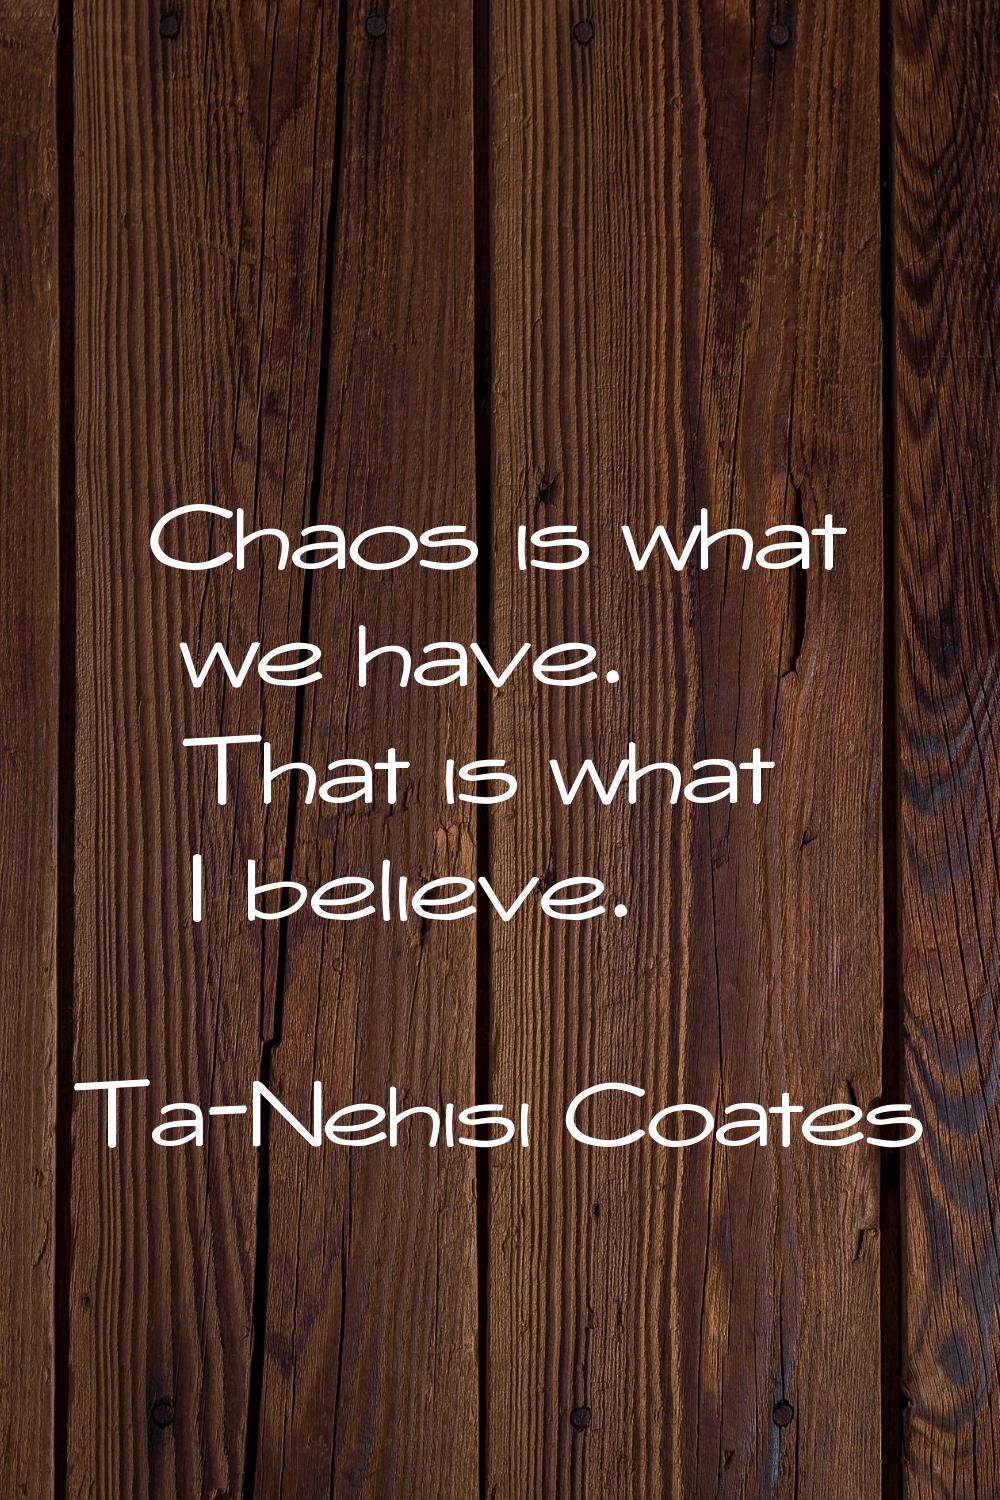 Chaos is what we have. That is what I believe.